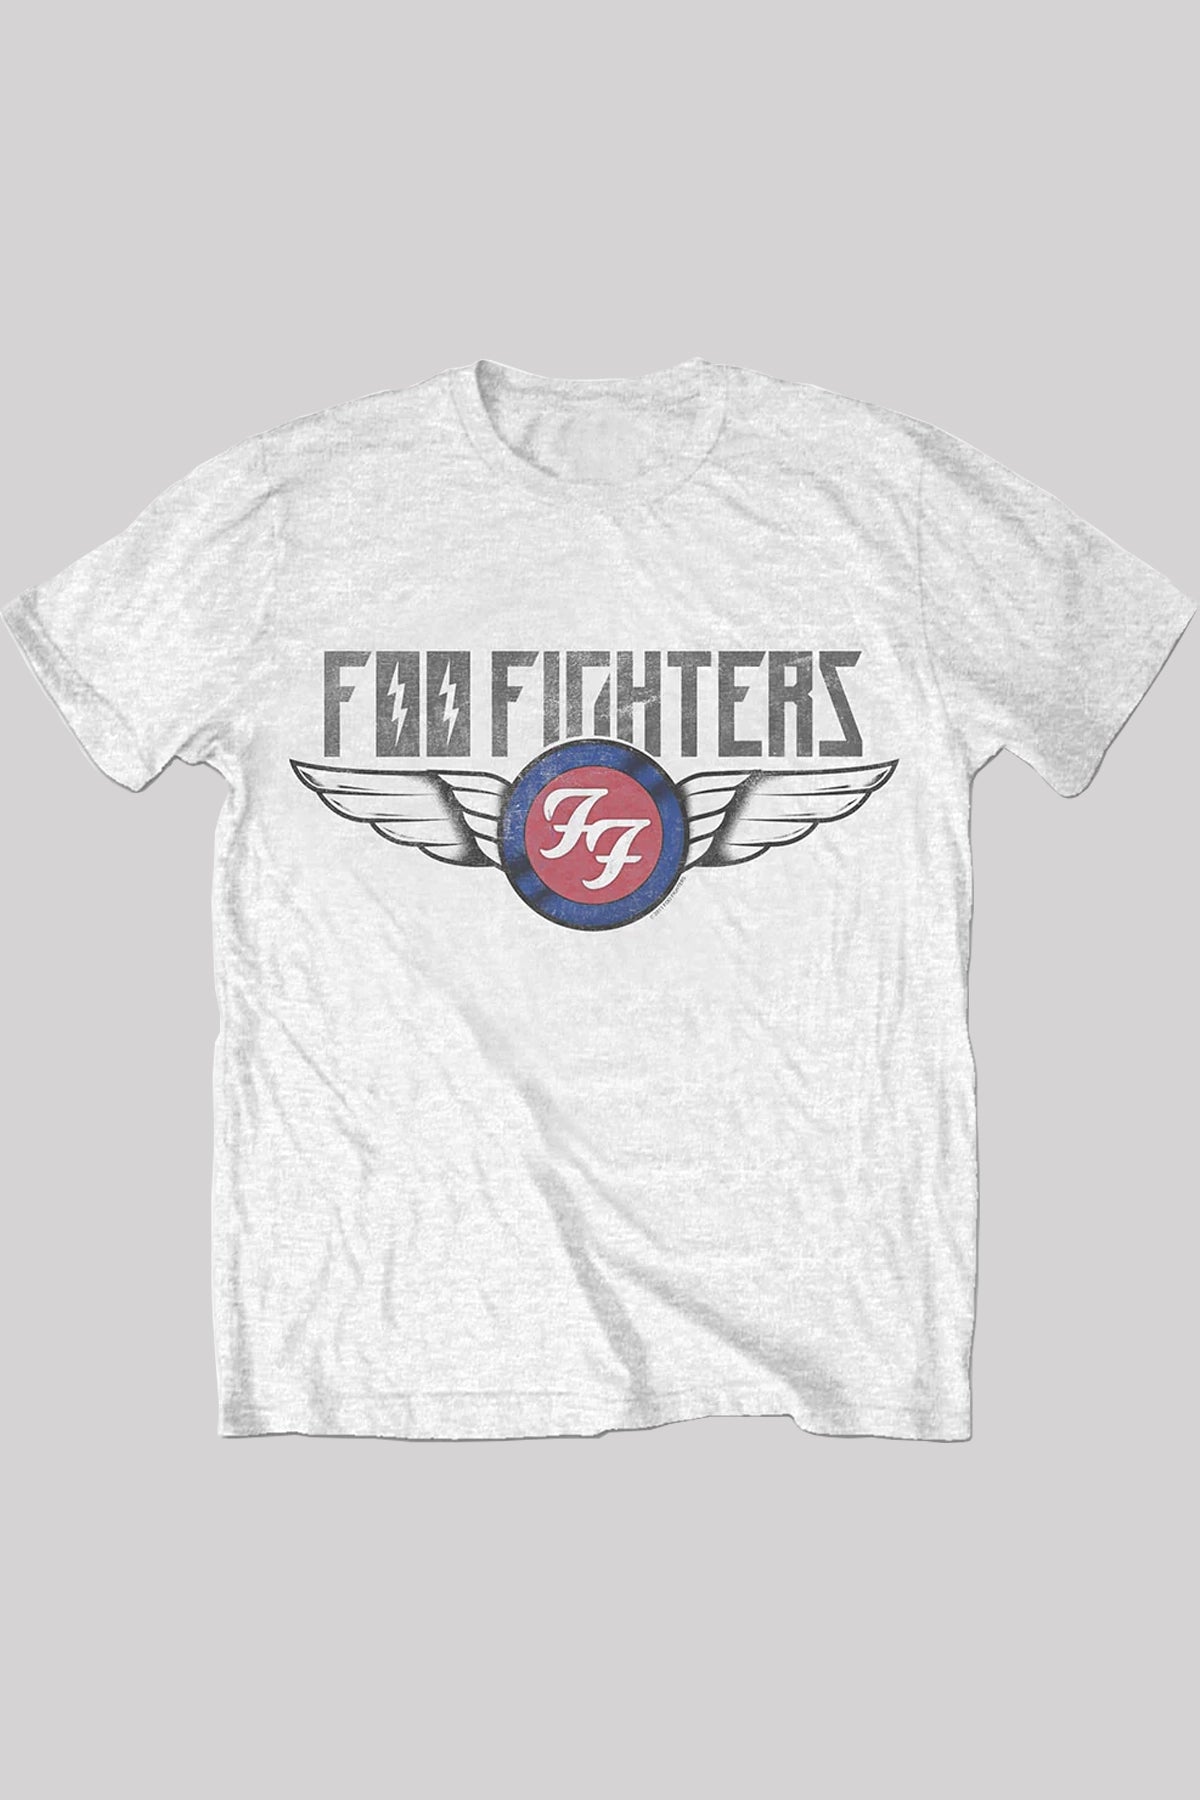 Foo Fighters Flash Wings Unisex White T-Shirt